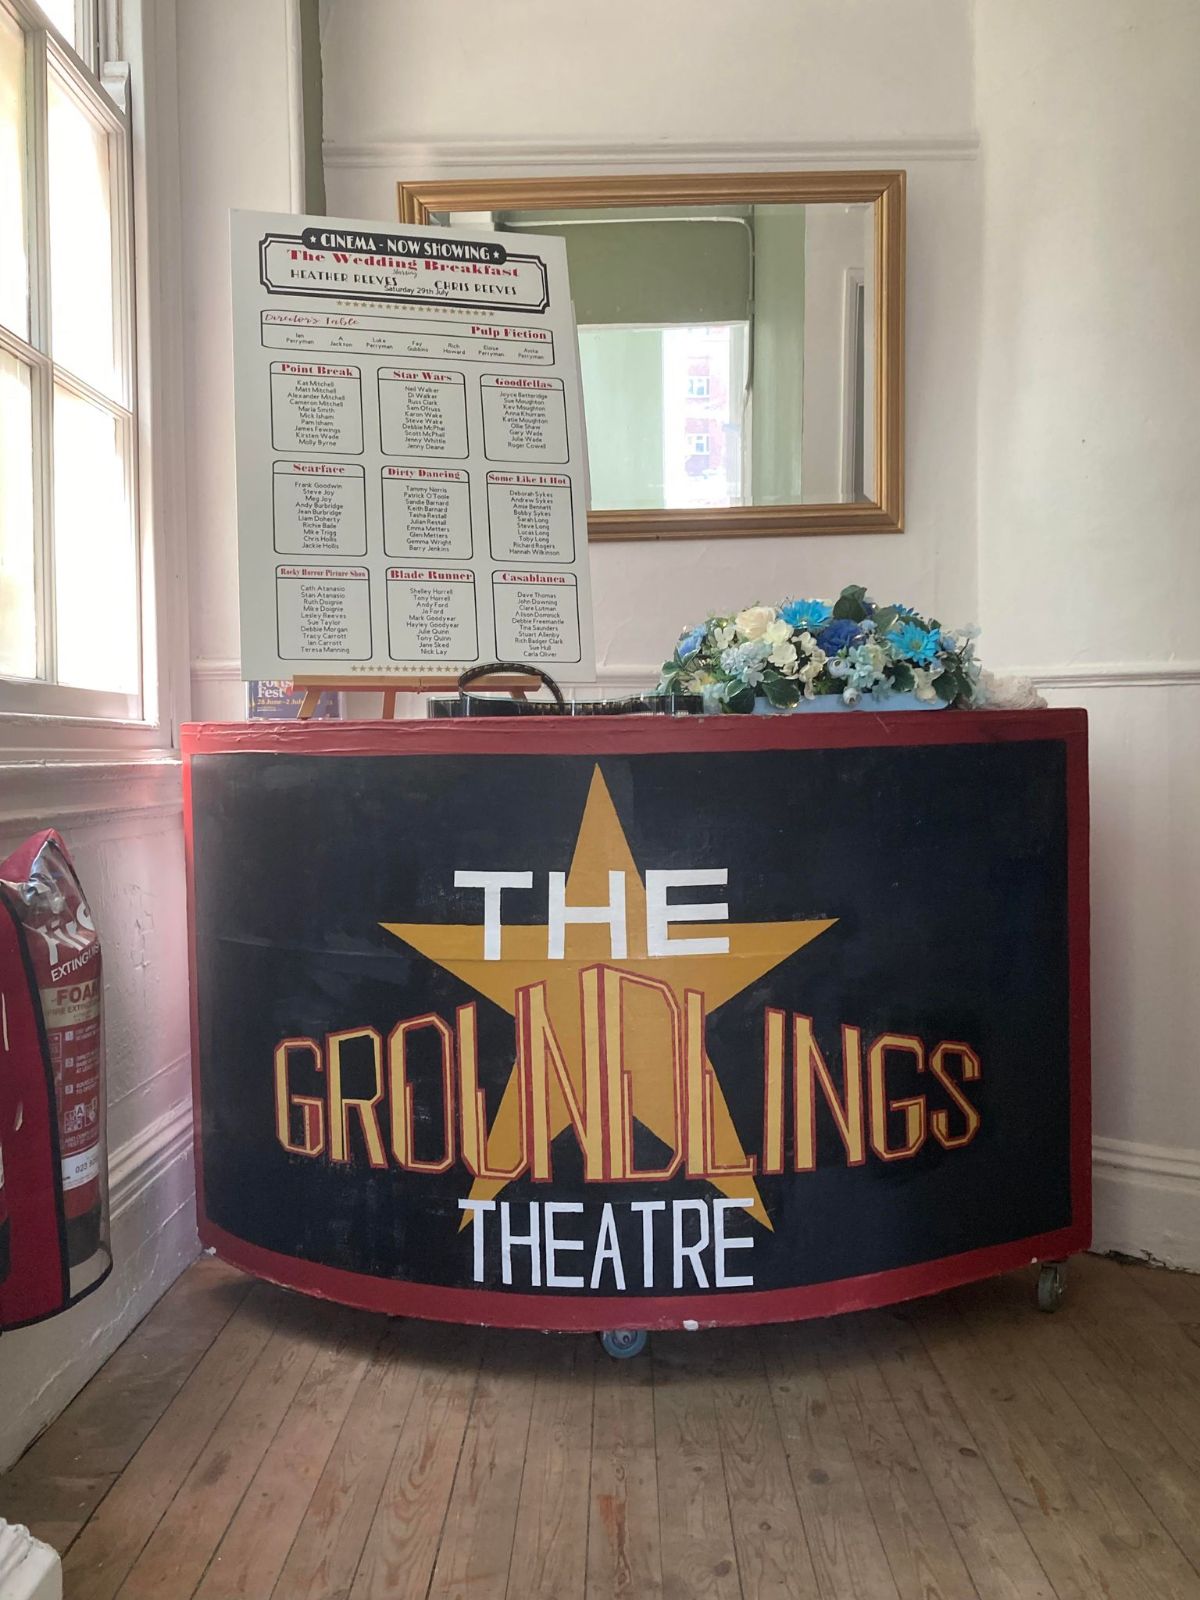 Gallery Item 140 for Groundlings Theatre